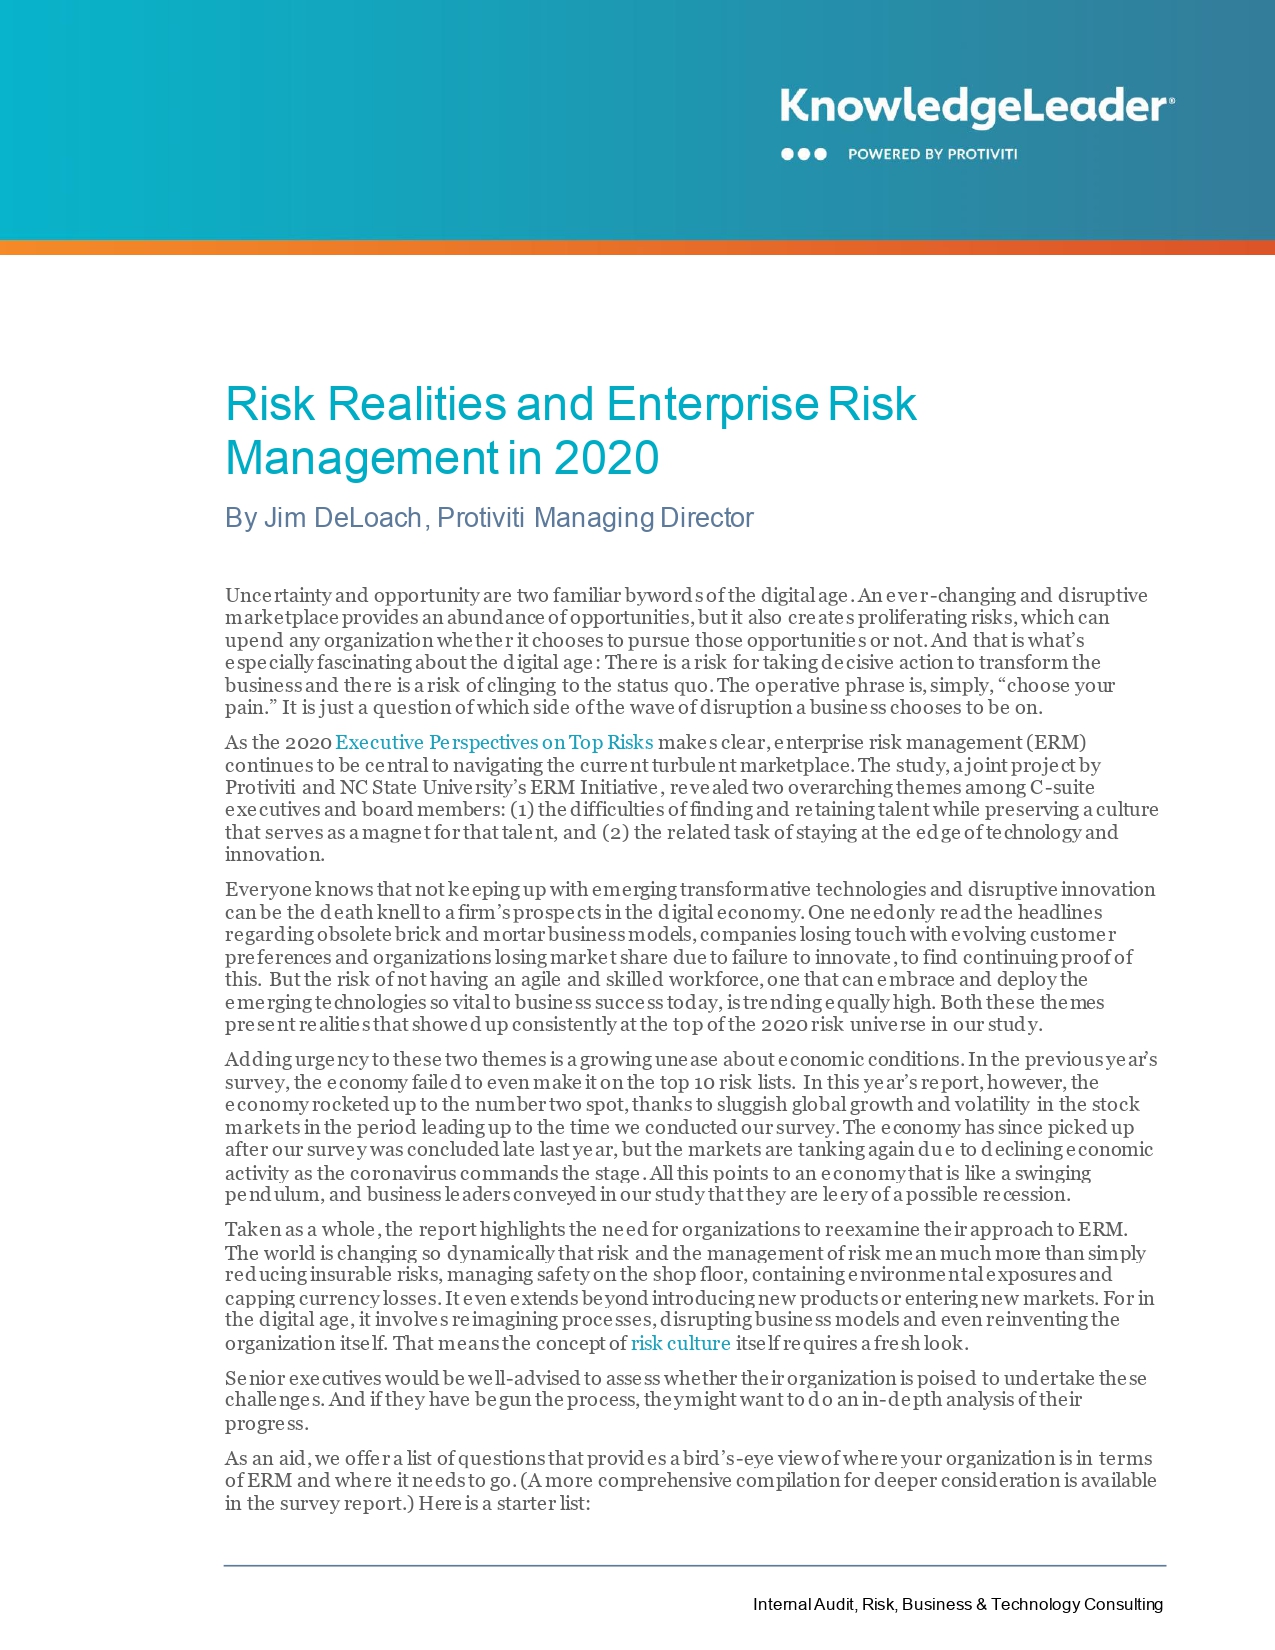 Risk Realities and Enterprise Risk Management in 2020